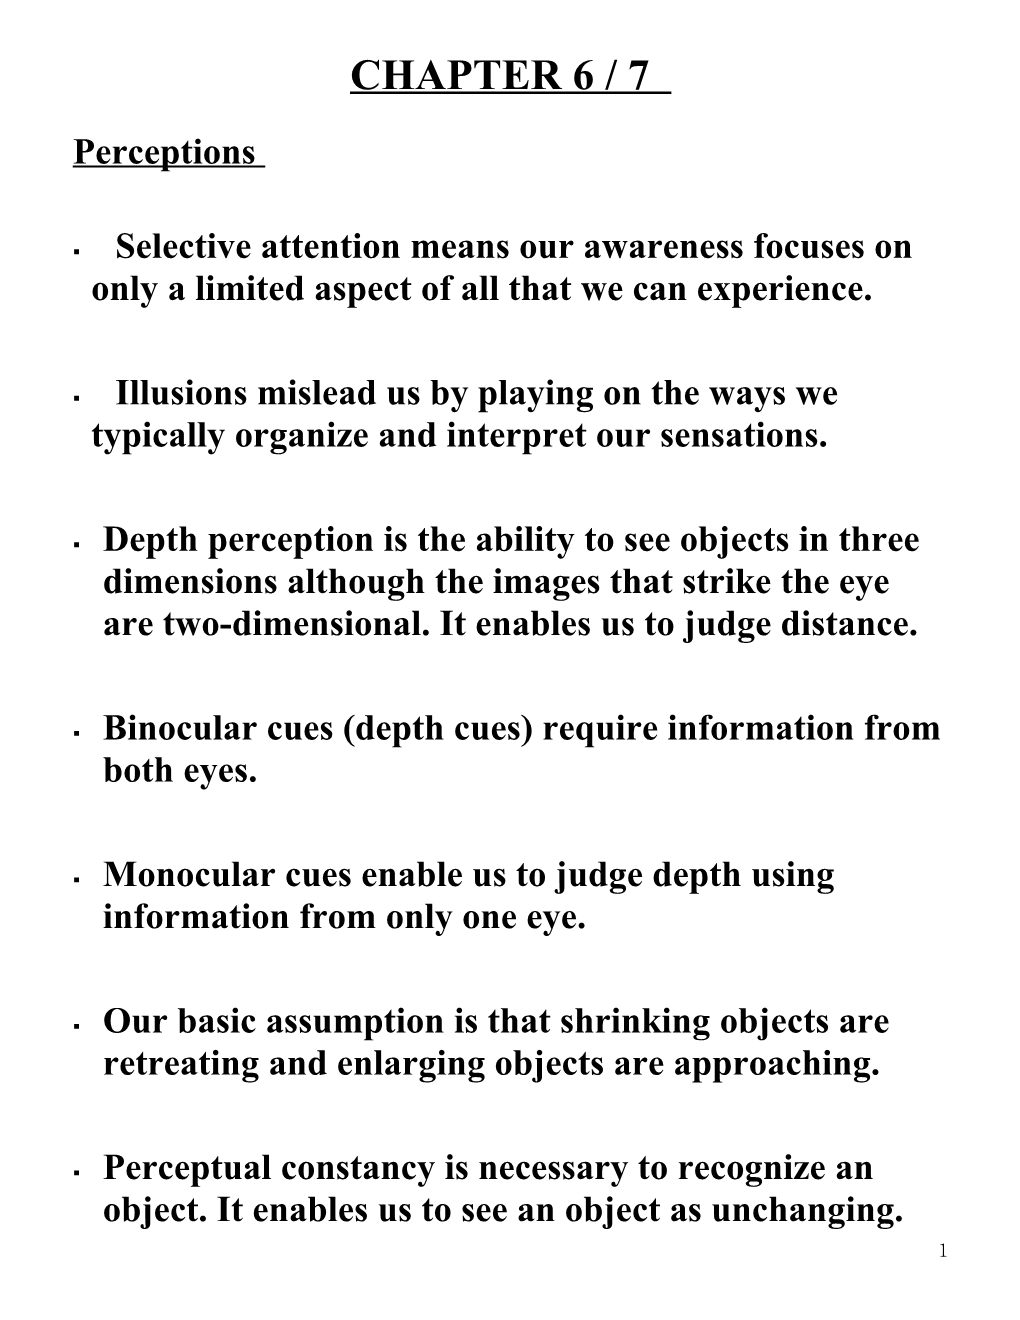 Illusions Mislead Us by Playing on the Ways We Typically Organize and Interpret Our Sensations